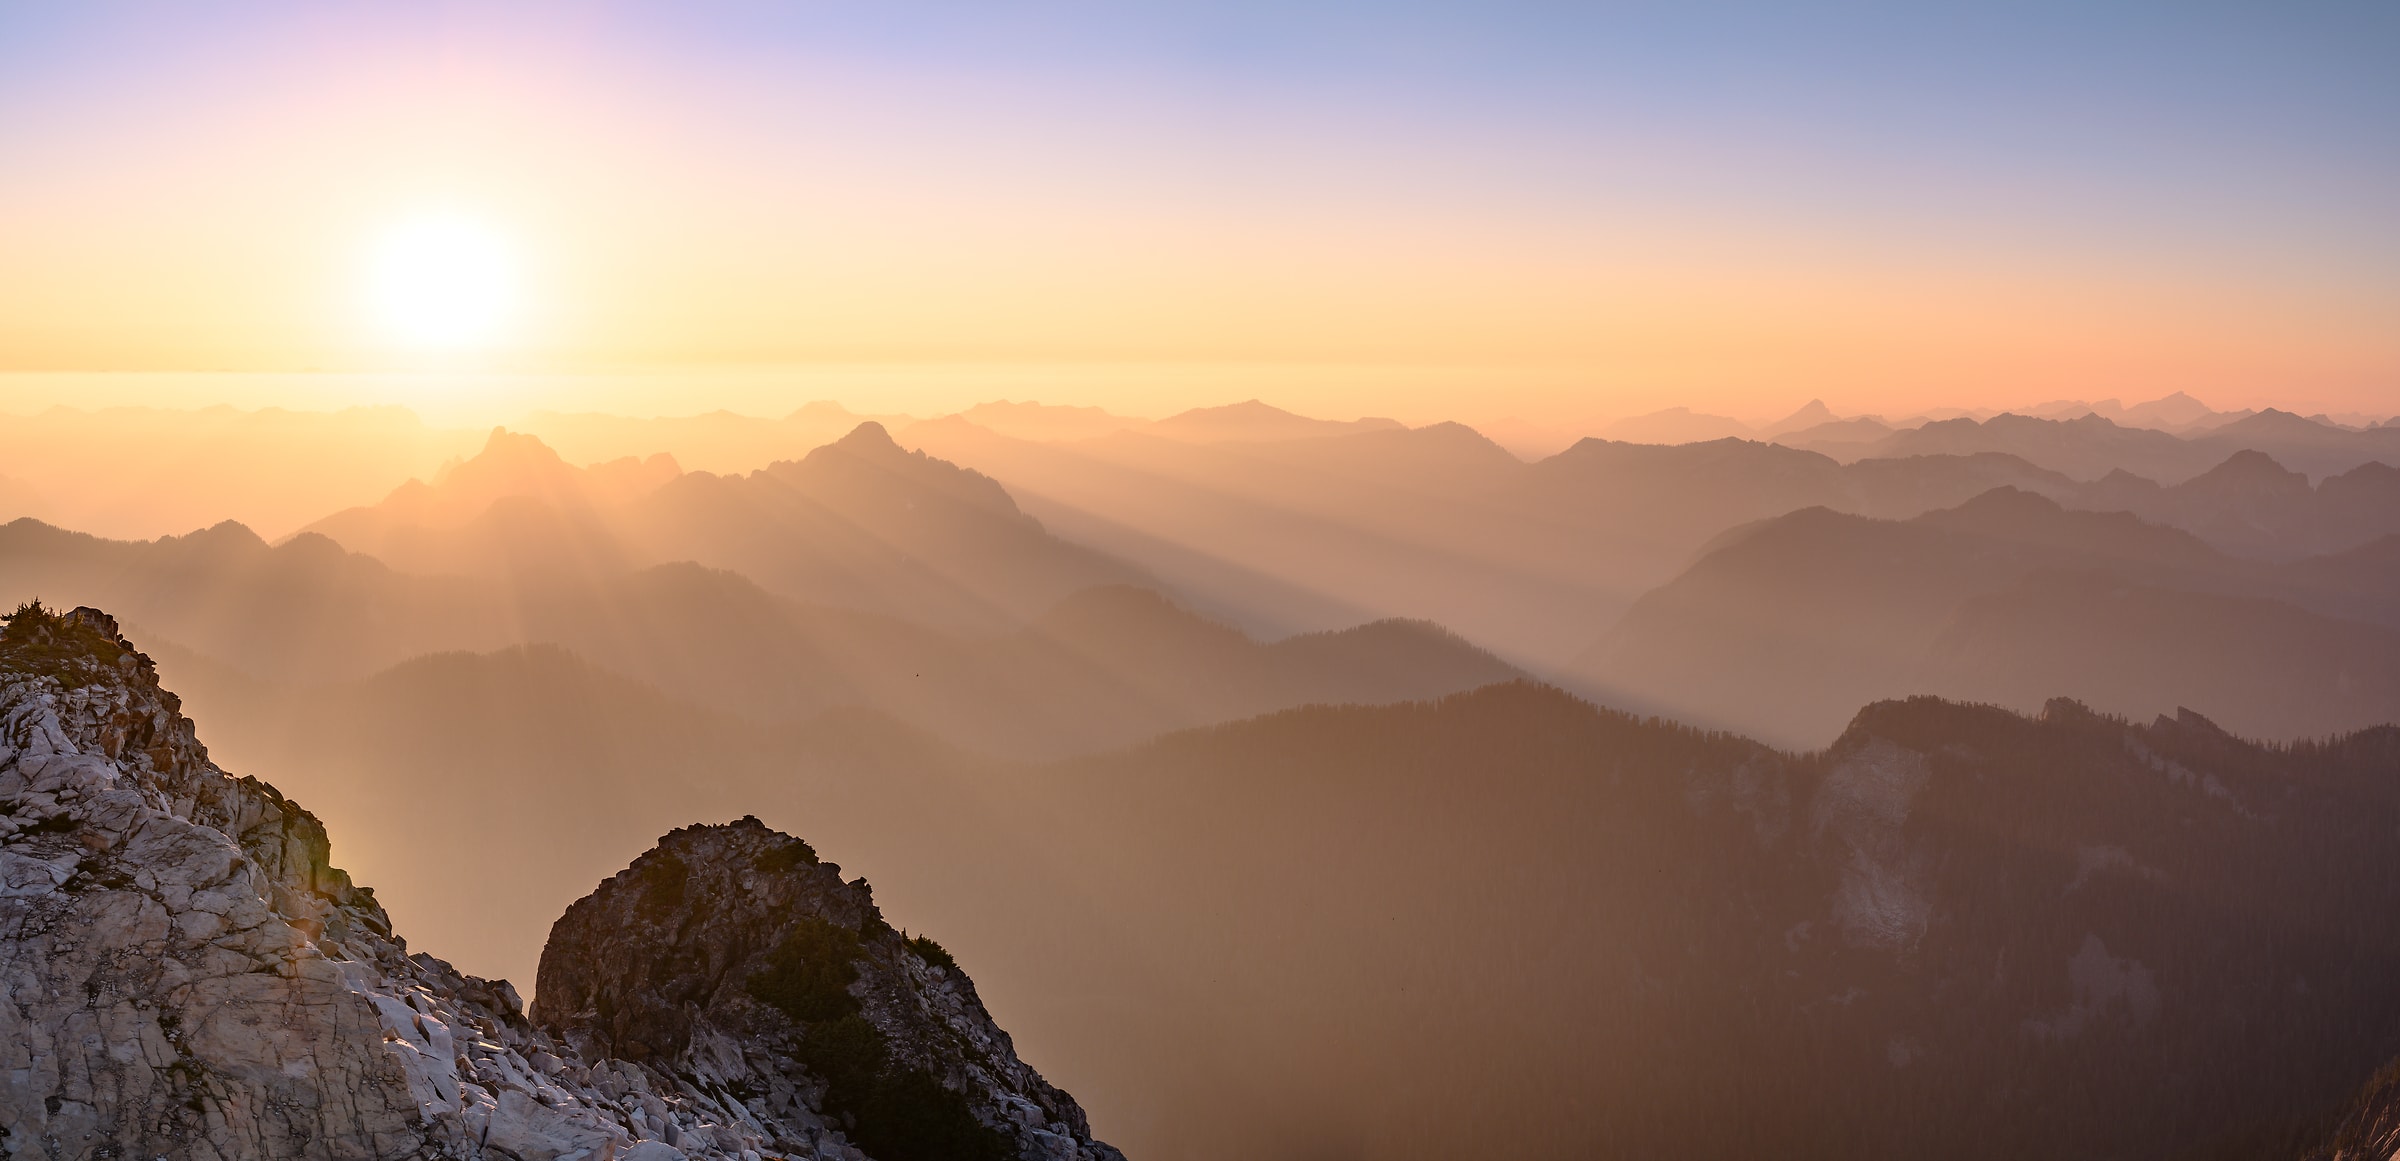 136 megapixels! A very high resolution, large-format VAST photo print of a sunset with pastel colors and mountain ridgelines; landscape photograph created by Scott Rinckenberger from the Summit of Big Snow Mountain in the Alpine Lakes Wilderness, Washington.